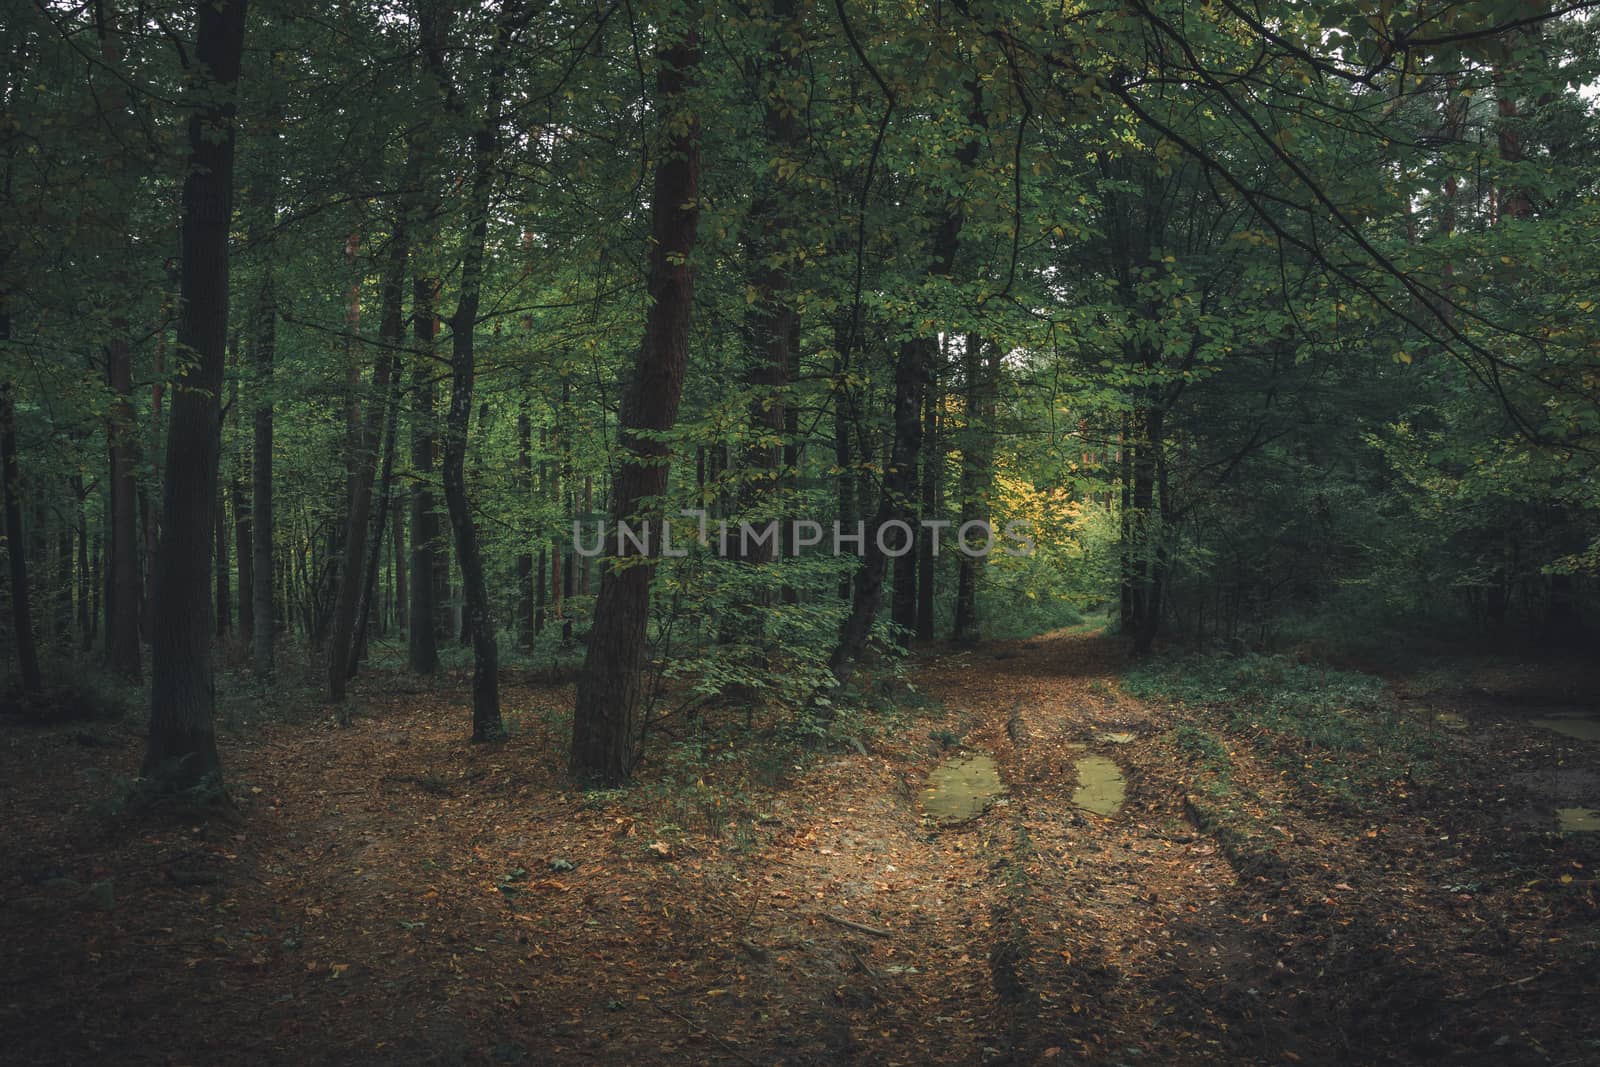 Path through a dark and wet forest, moody landscape